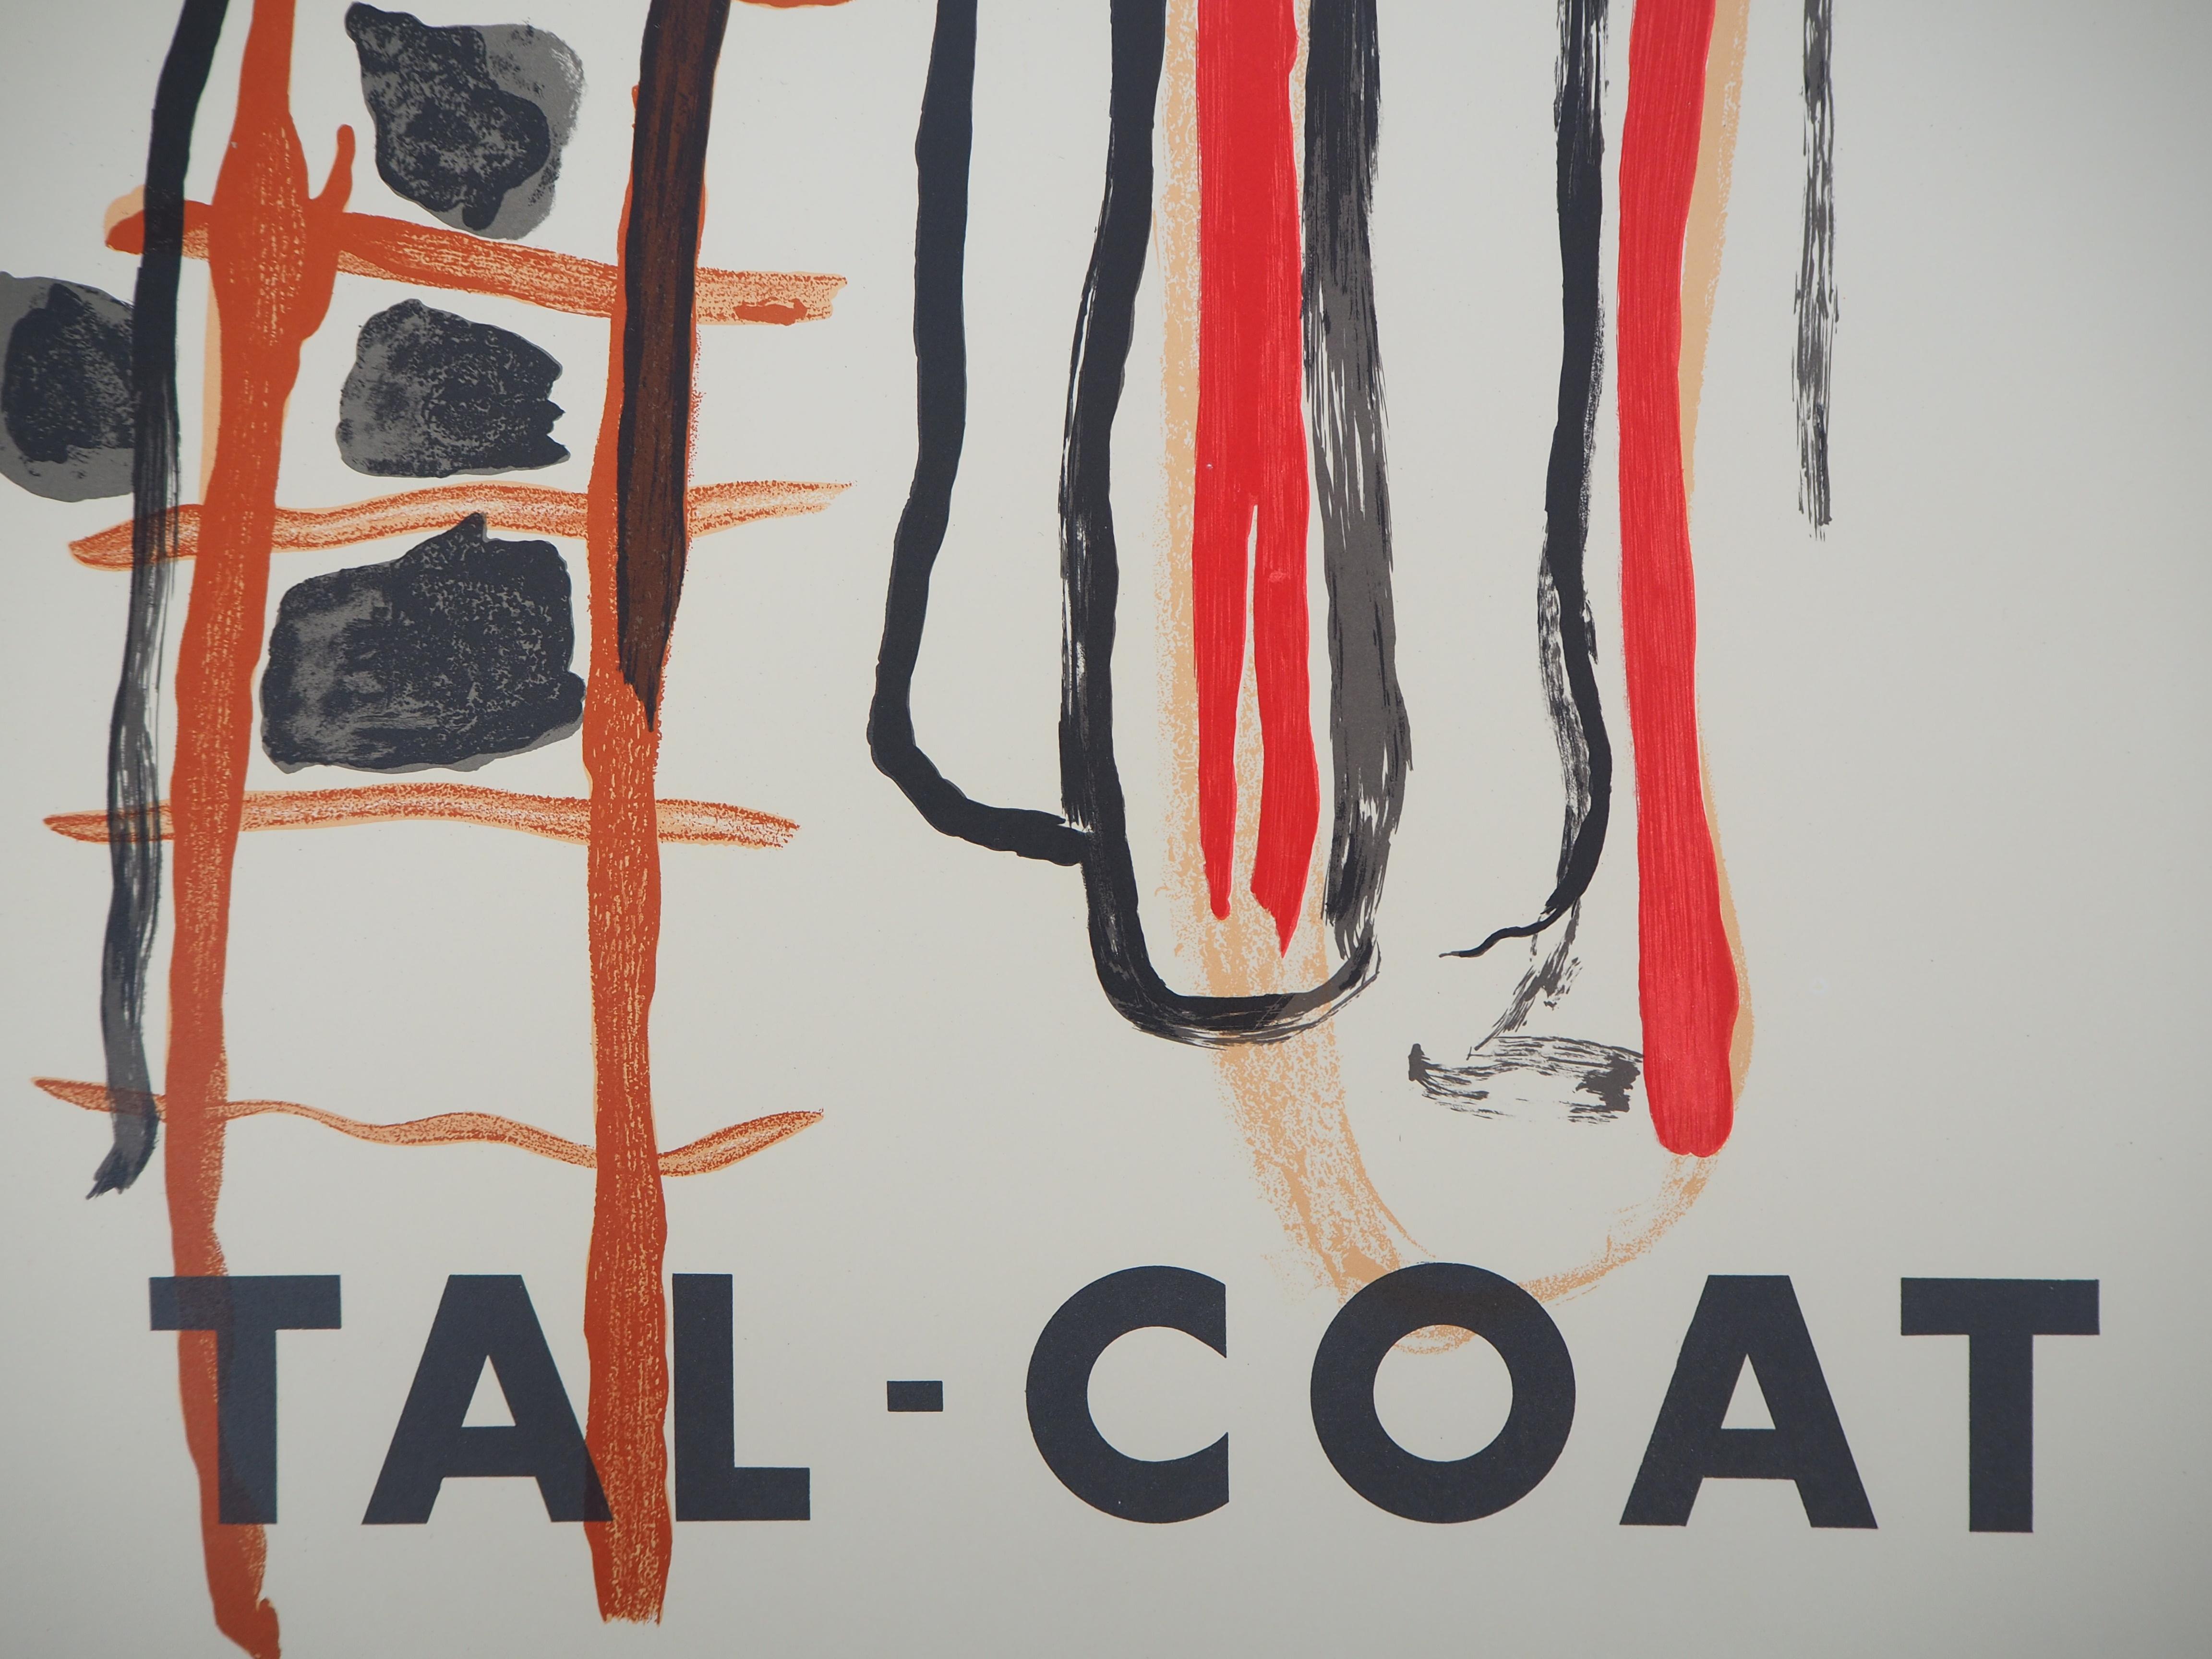 Pierre TAL-COAT
Abstract Composition 

Original vintage lithograph poster
On paper 62 x 48 cm (c. 25 x 19 in)
Edited for the artist exhibition at Maeght Gallery in 1956

Excellent condition